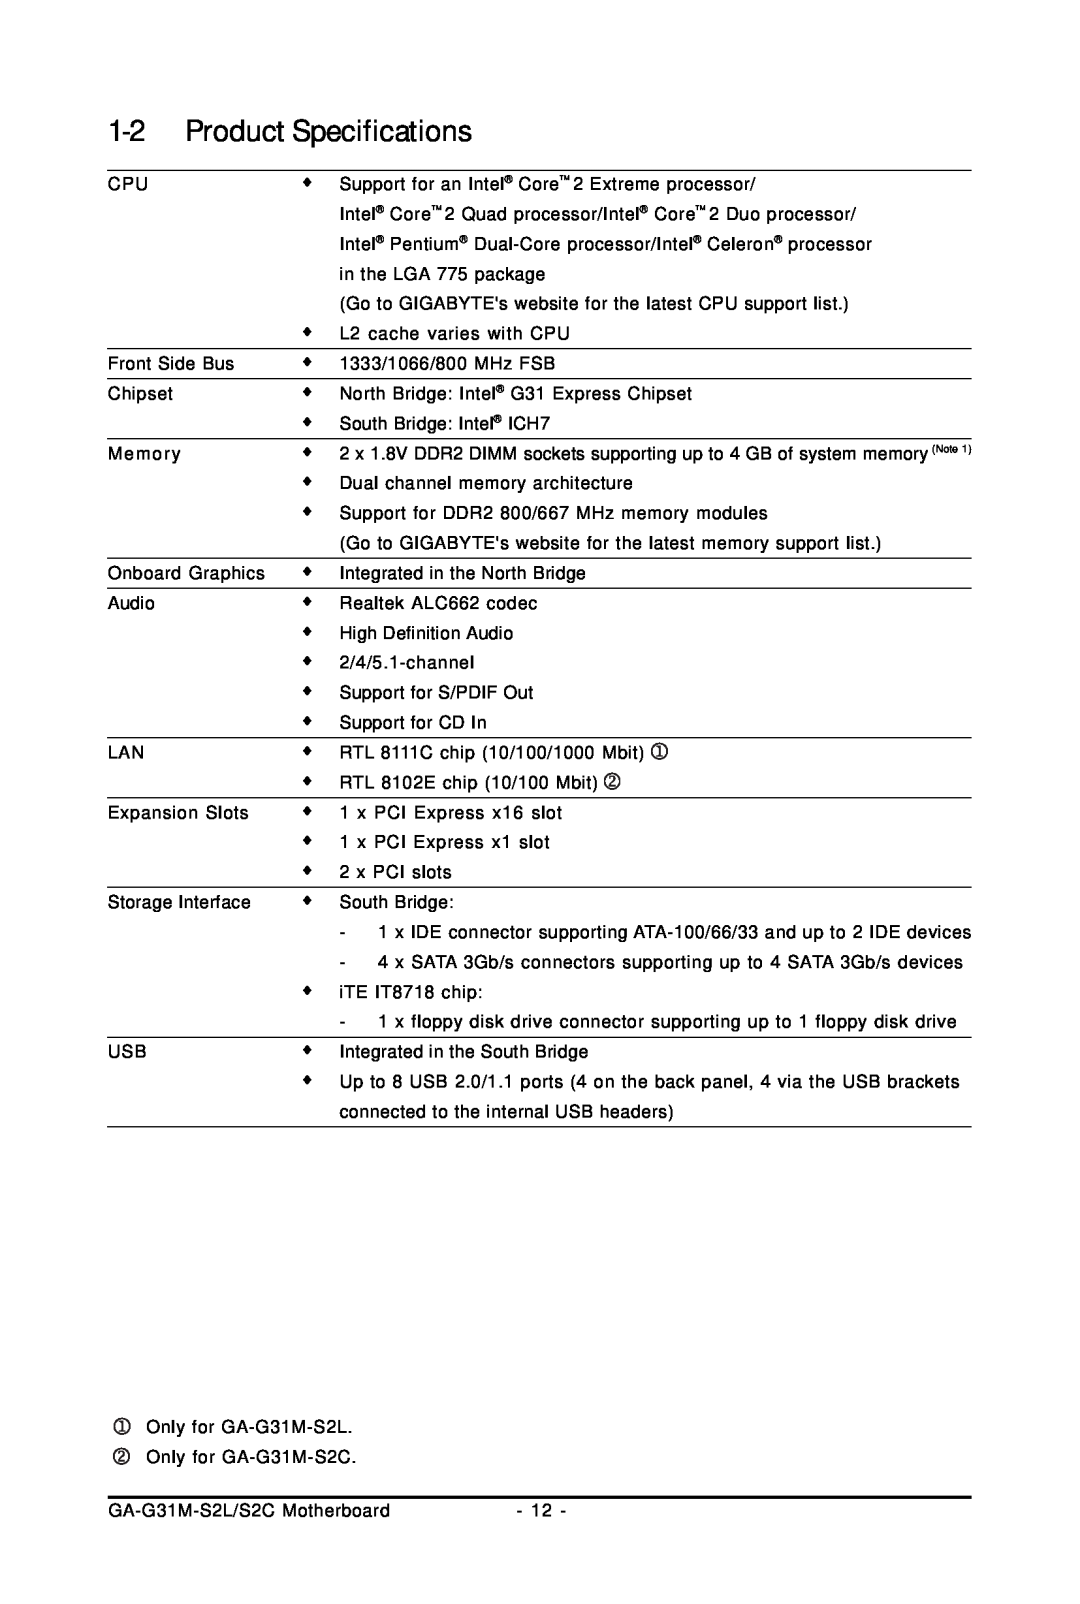 Intel GA-G31M-S2L, GA-G31M-S2C user manual Product Specifications 